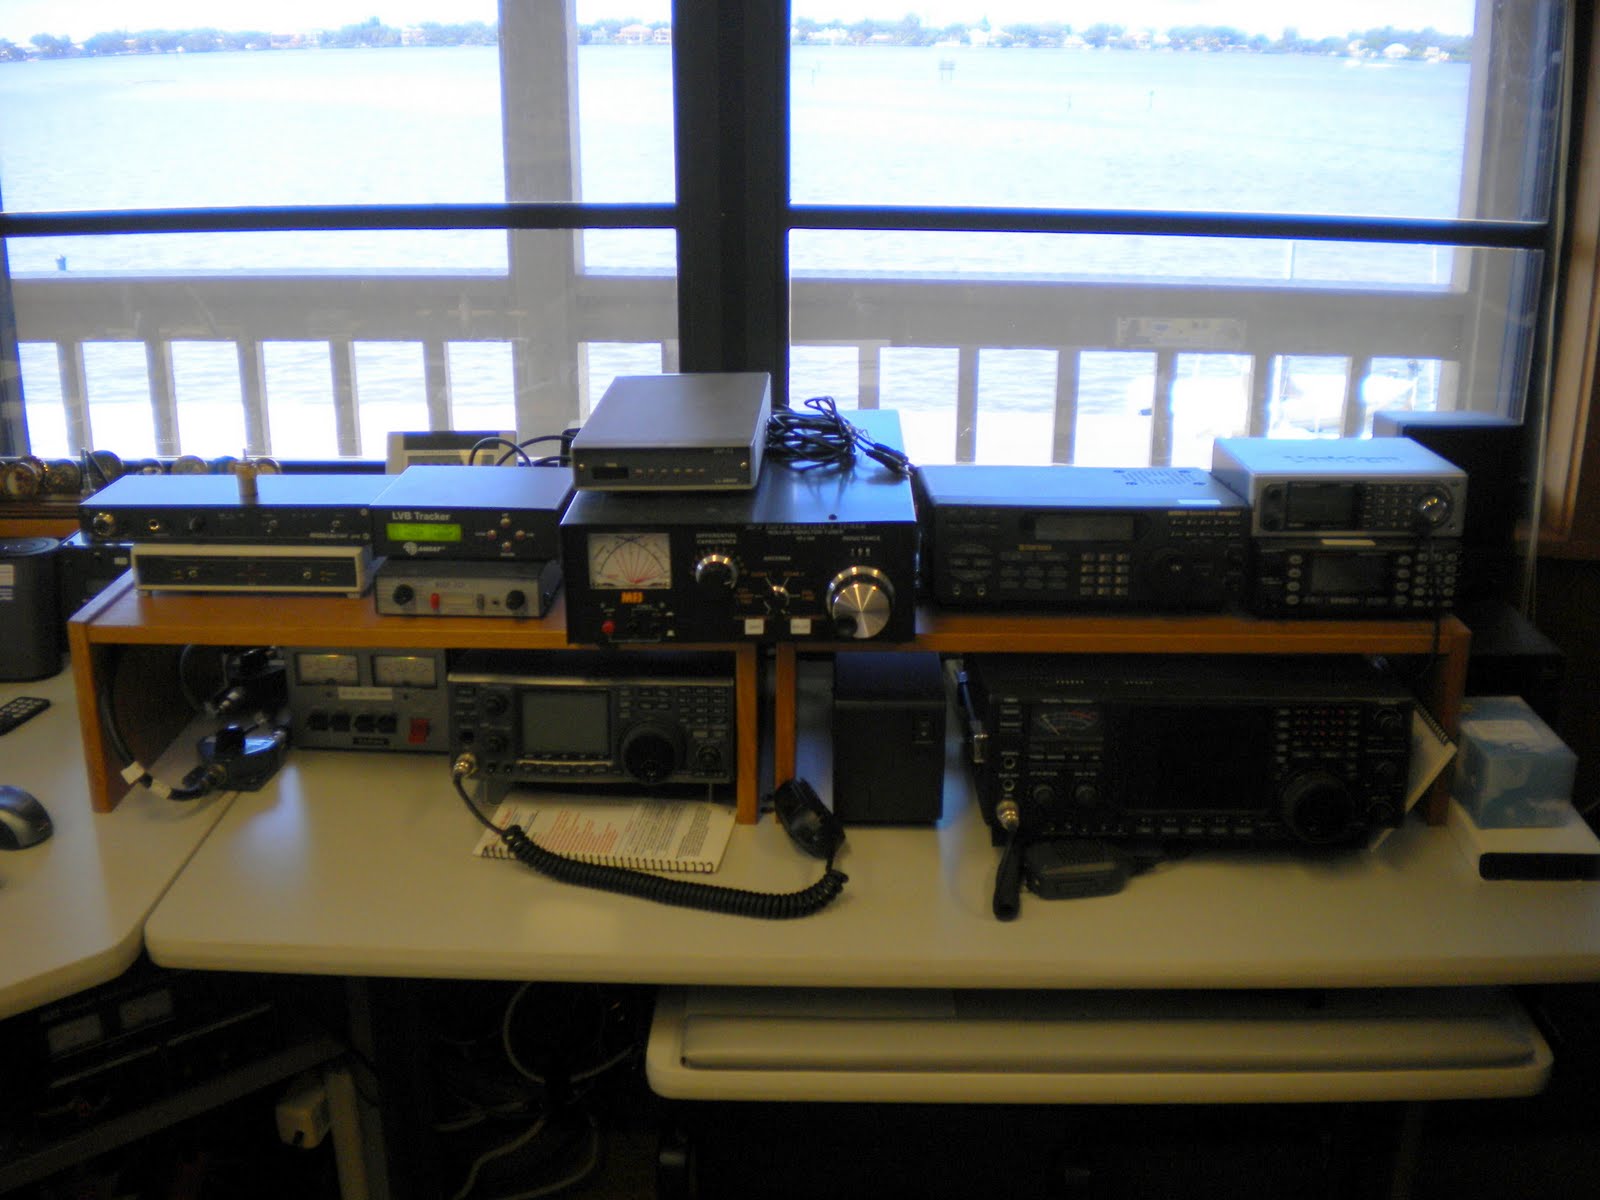 Another large desk is packed with lots of ham radio gear.